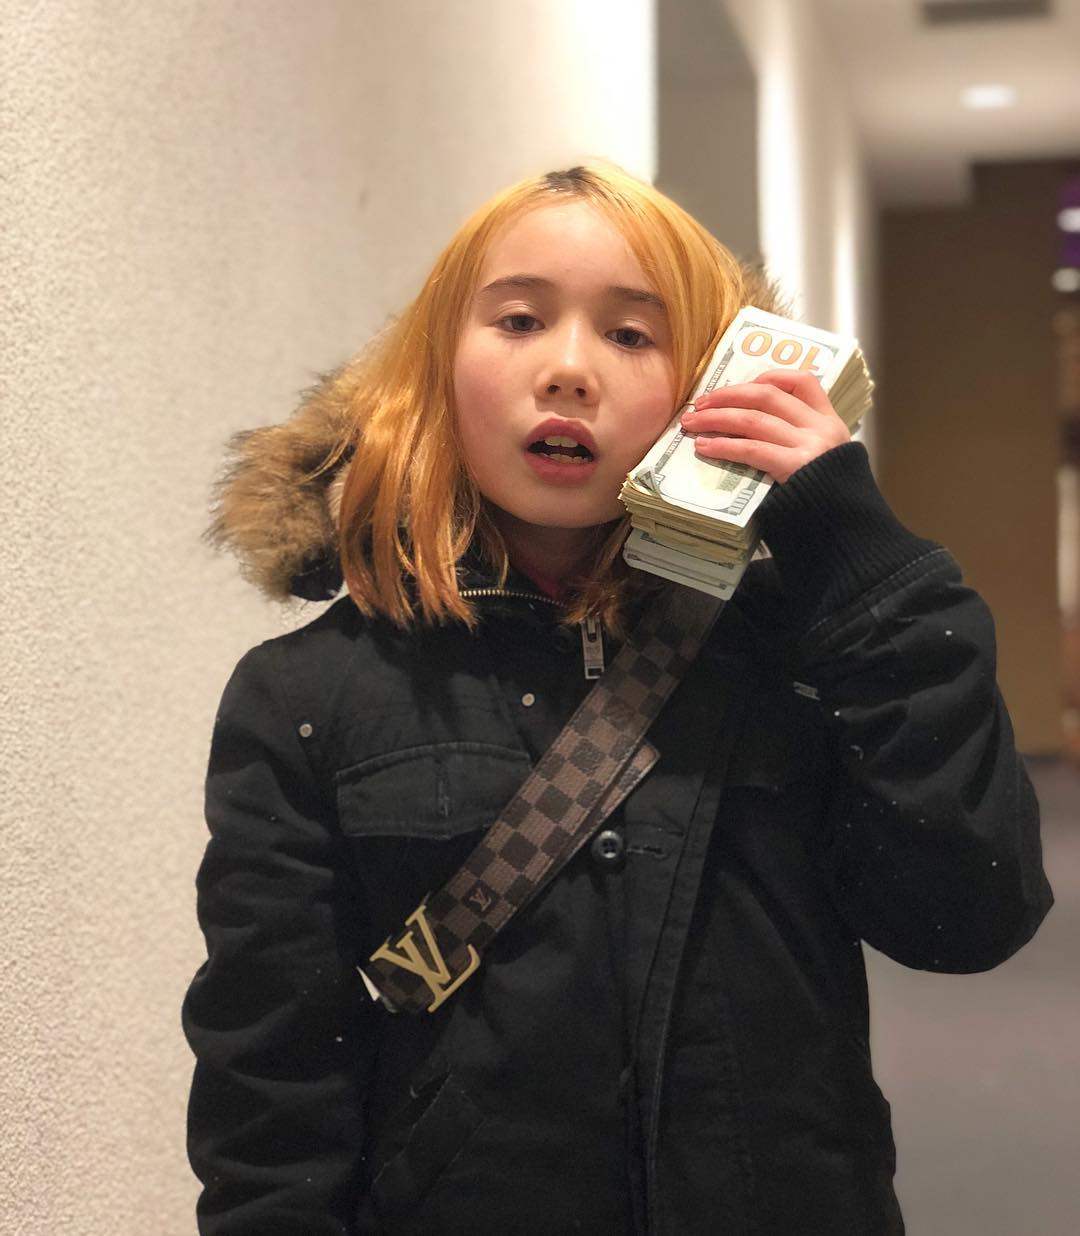 Lil Tay strikes a typical pose, in a picture from her Instagram account. Photo: Instagram via @liltay